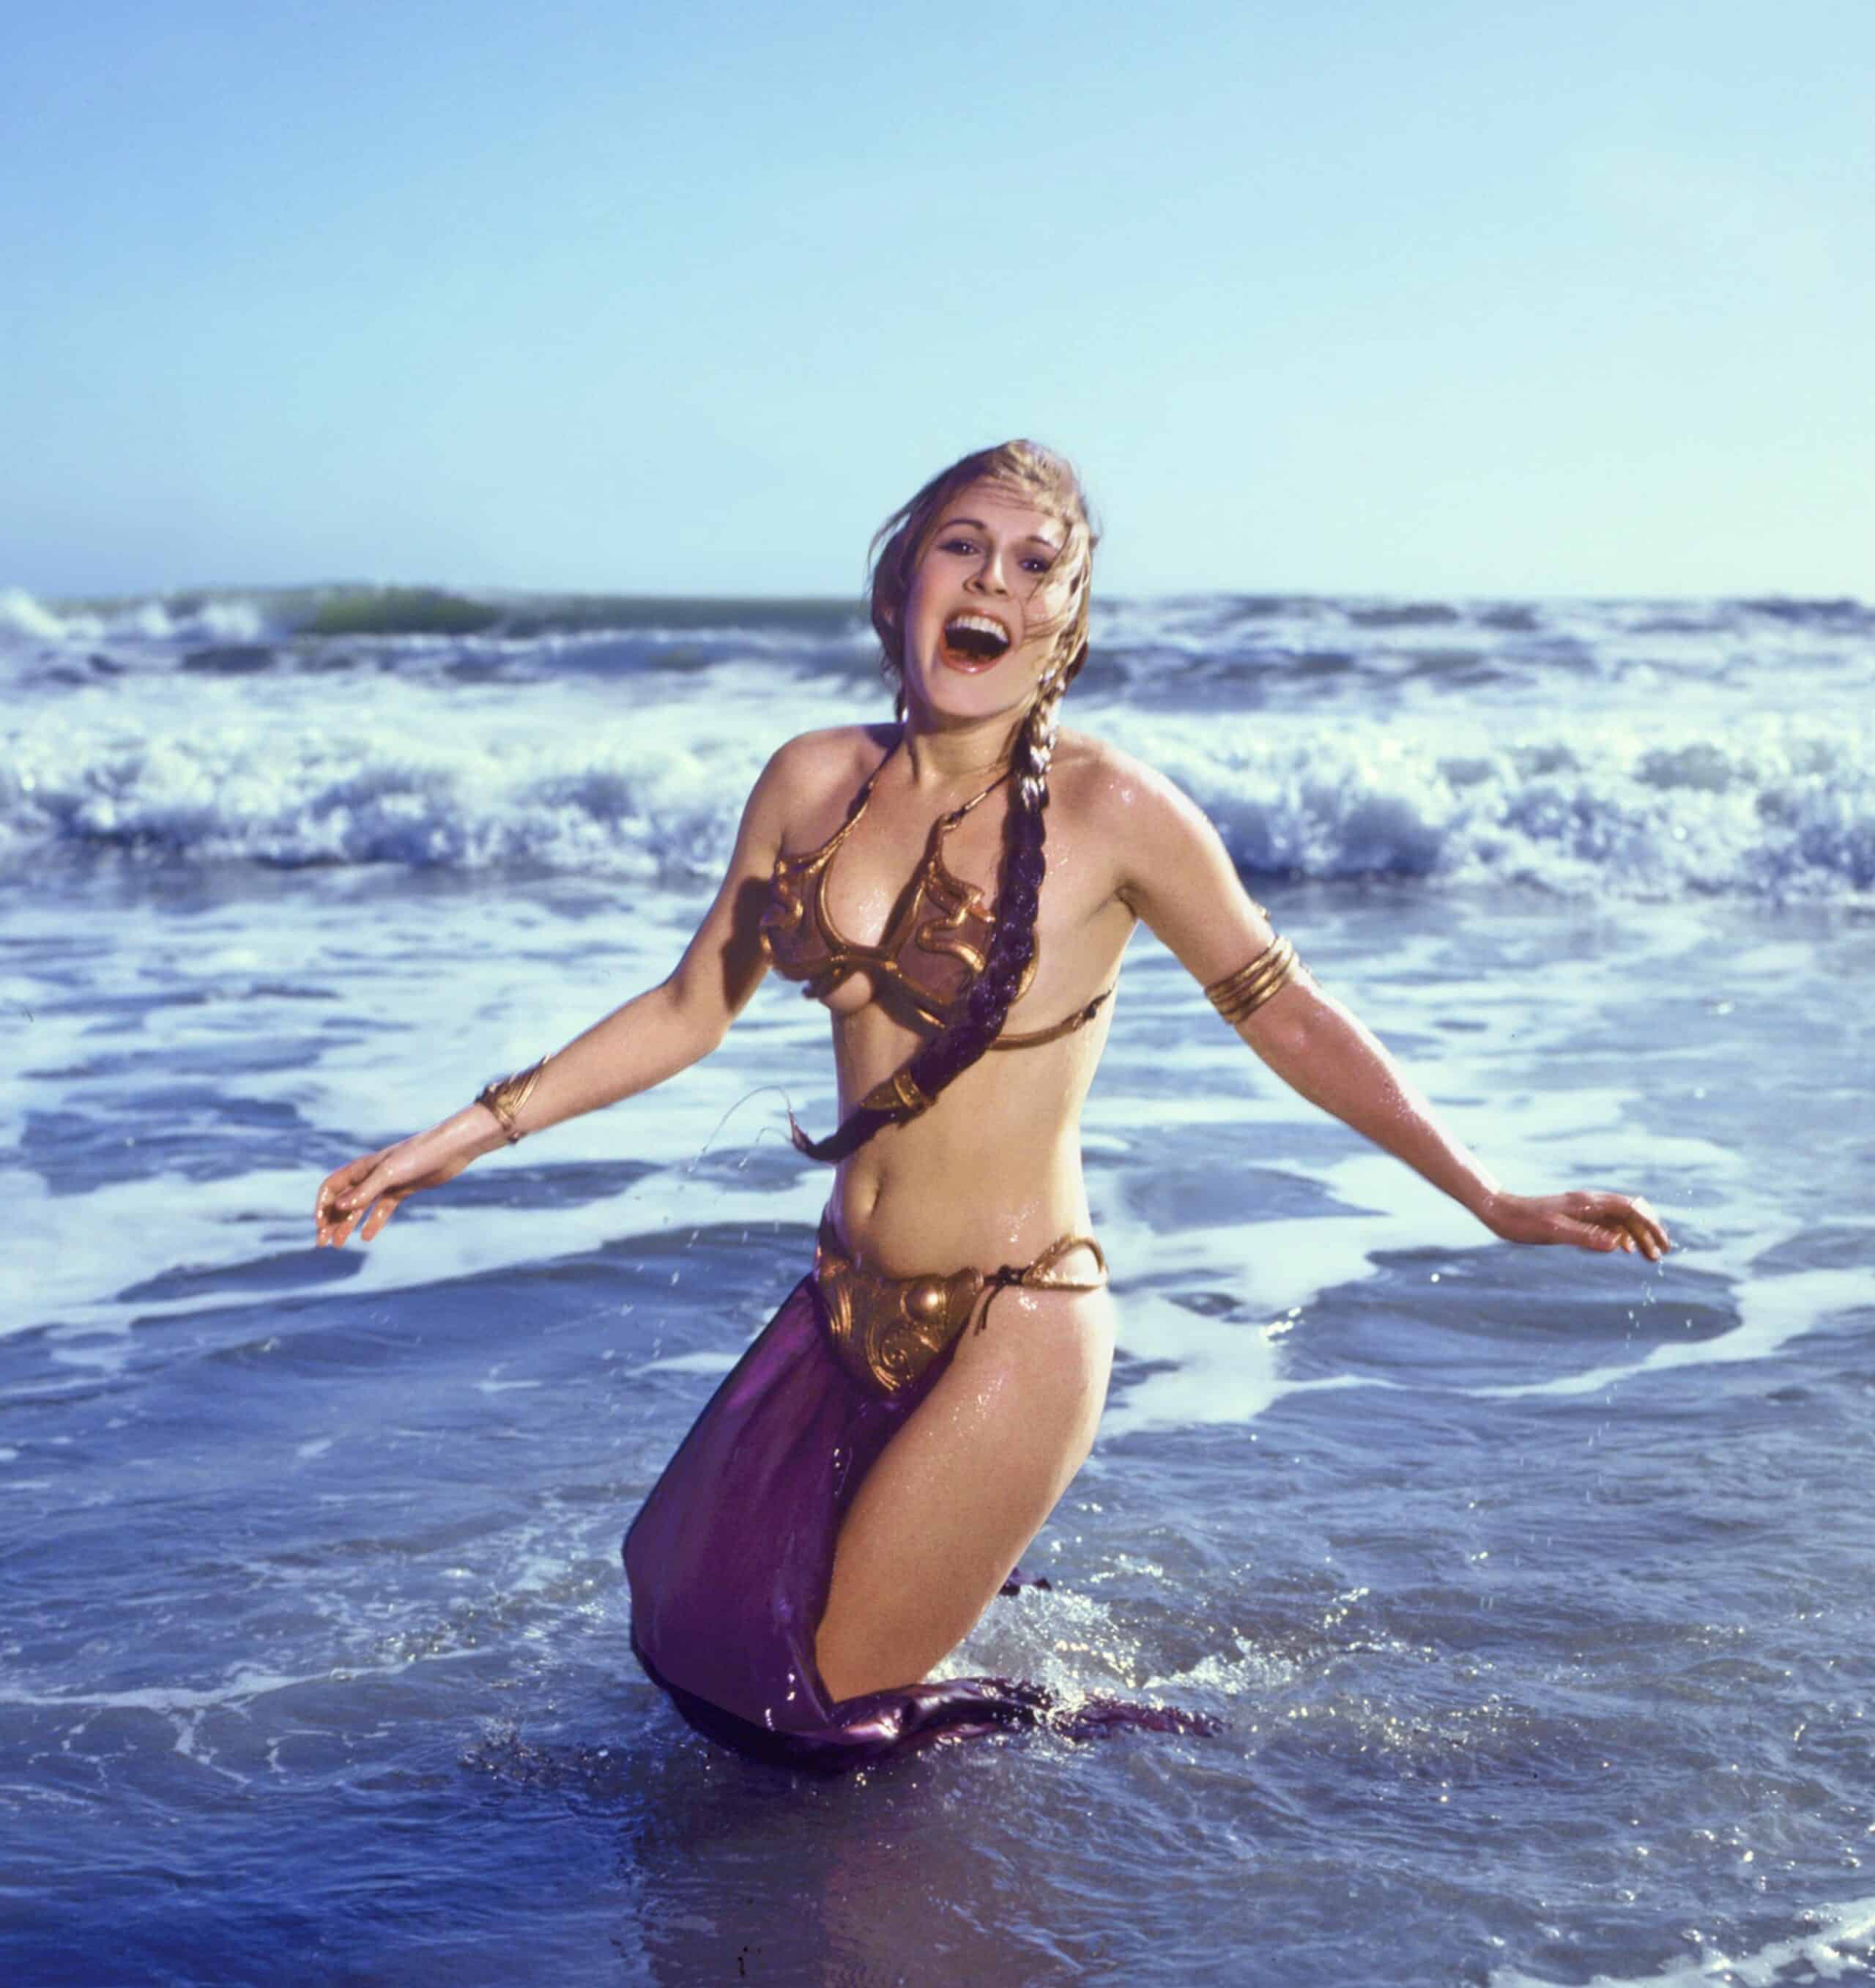 Leia in the surf - Imgur